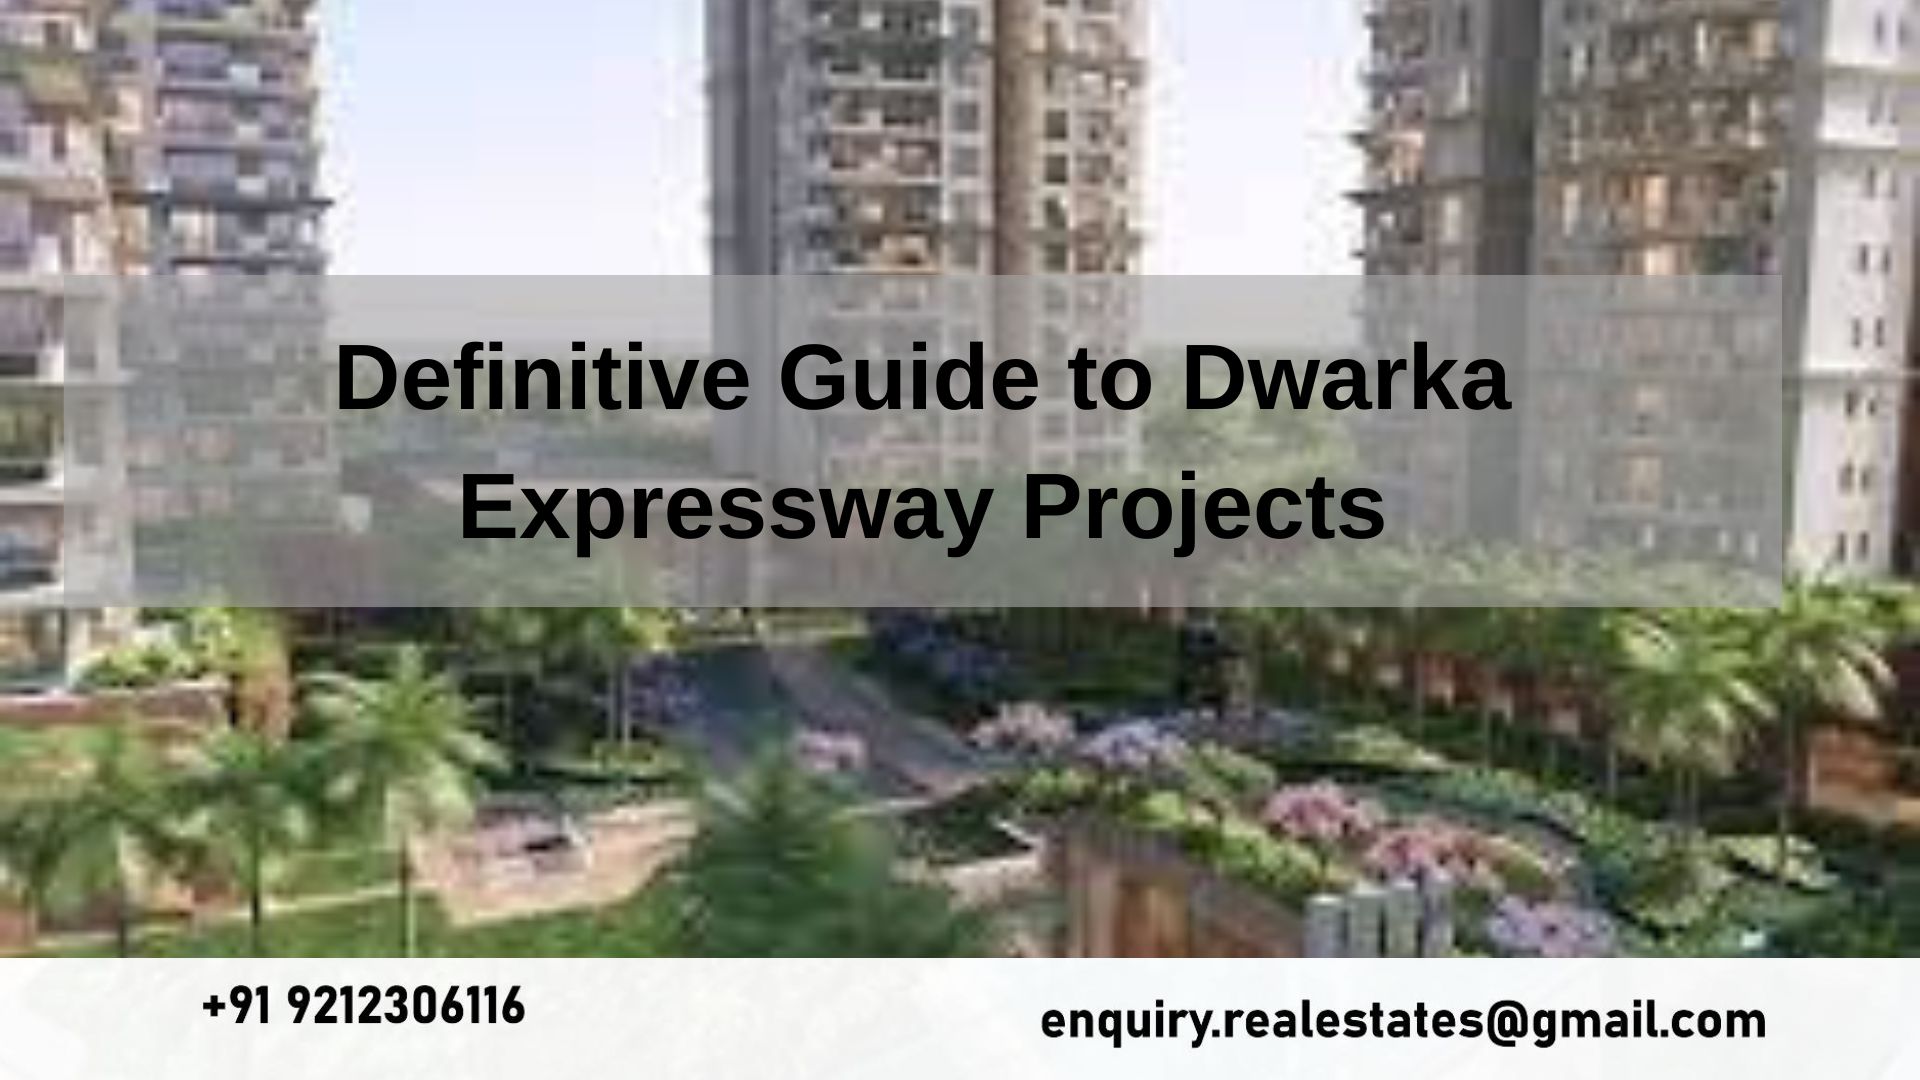 Definitive Guide to Dwarka Expressway Projects